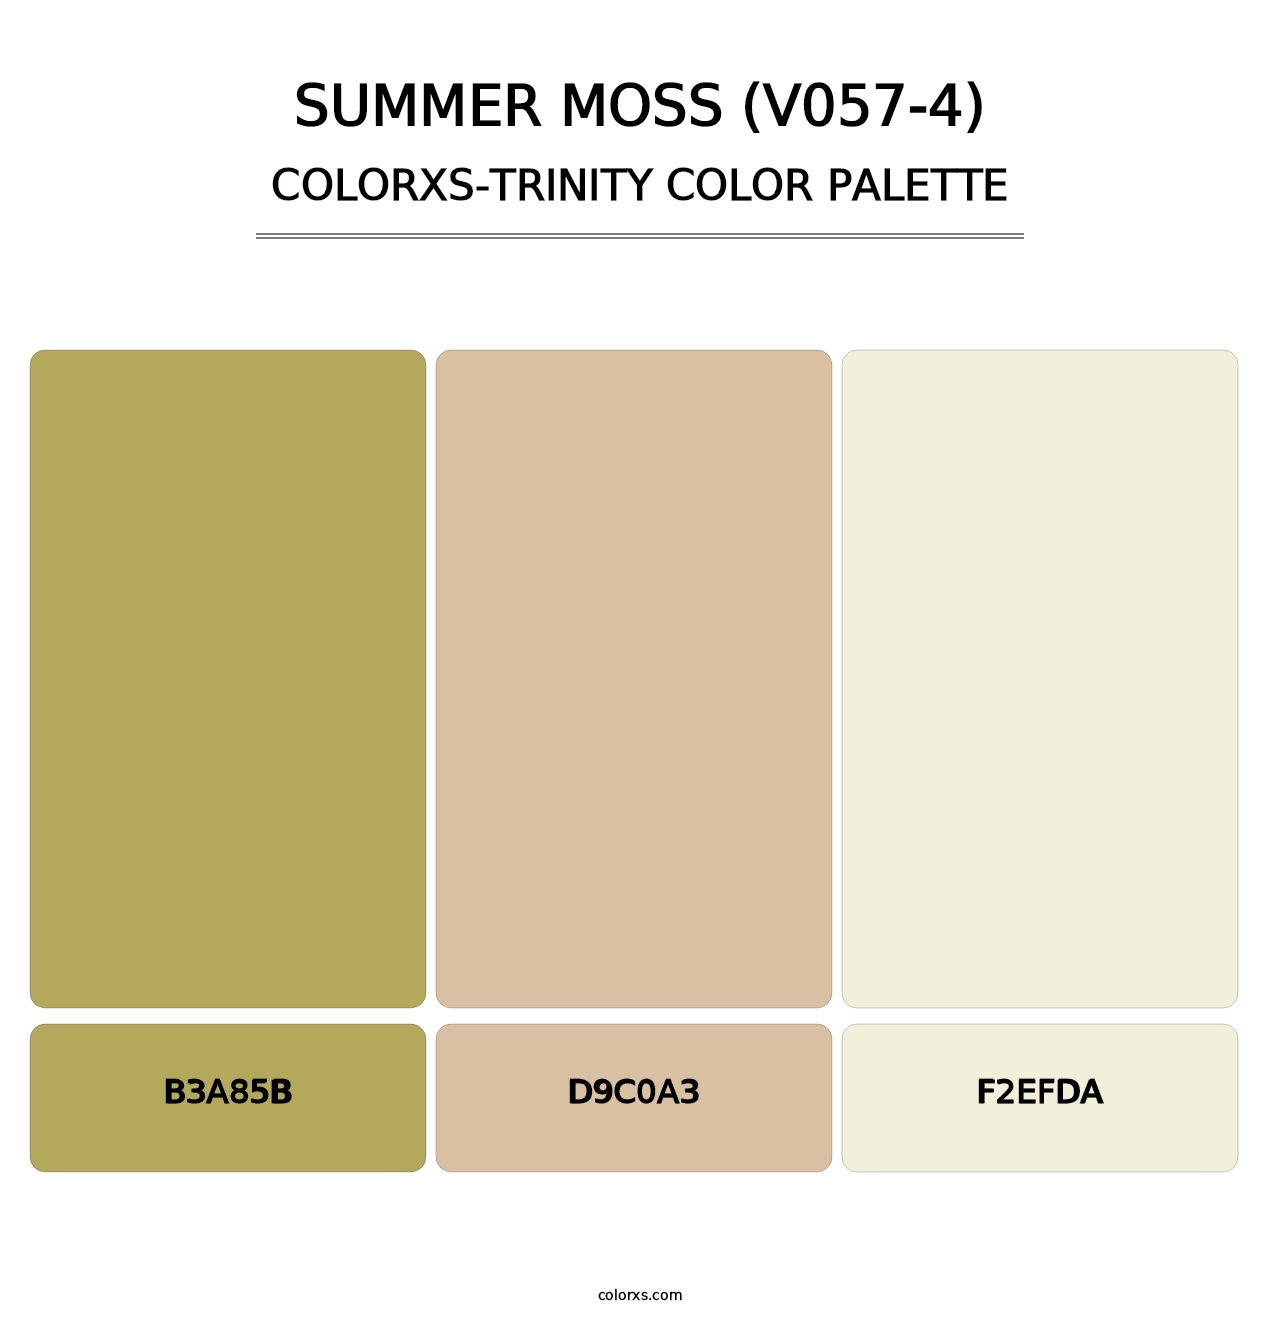 Summer Moss (V057-4) - Colorxs Trinity Palette